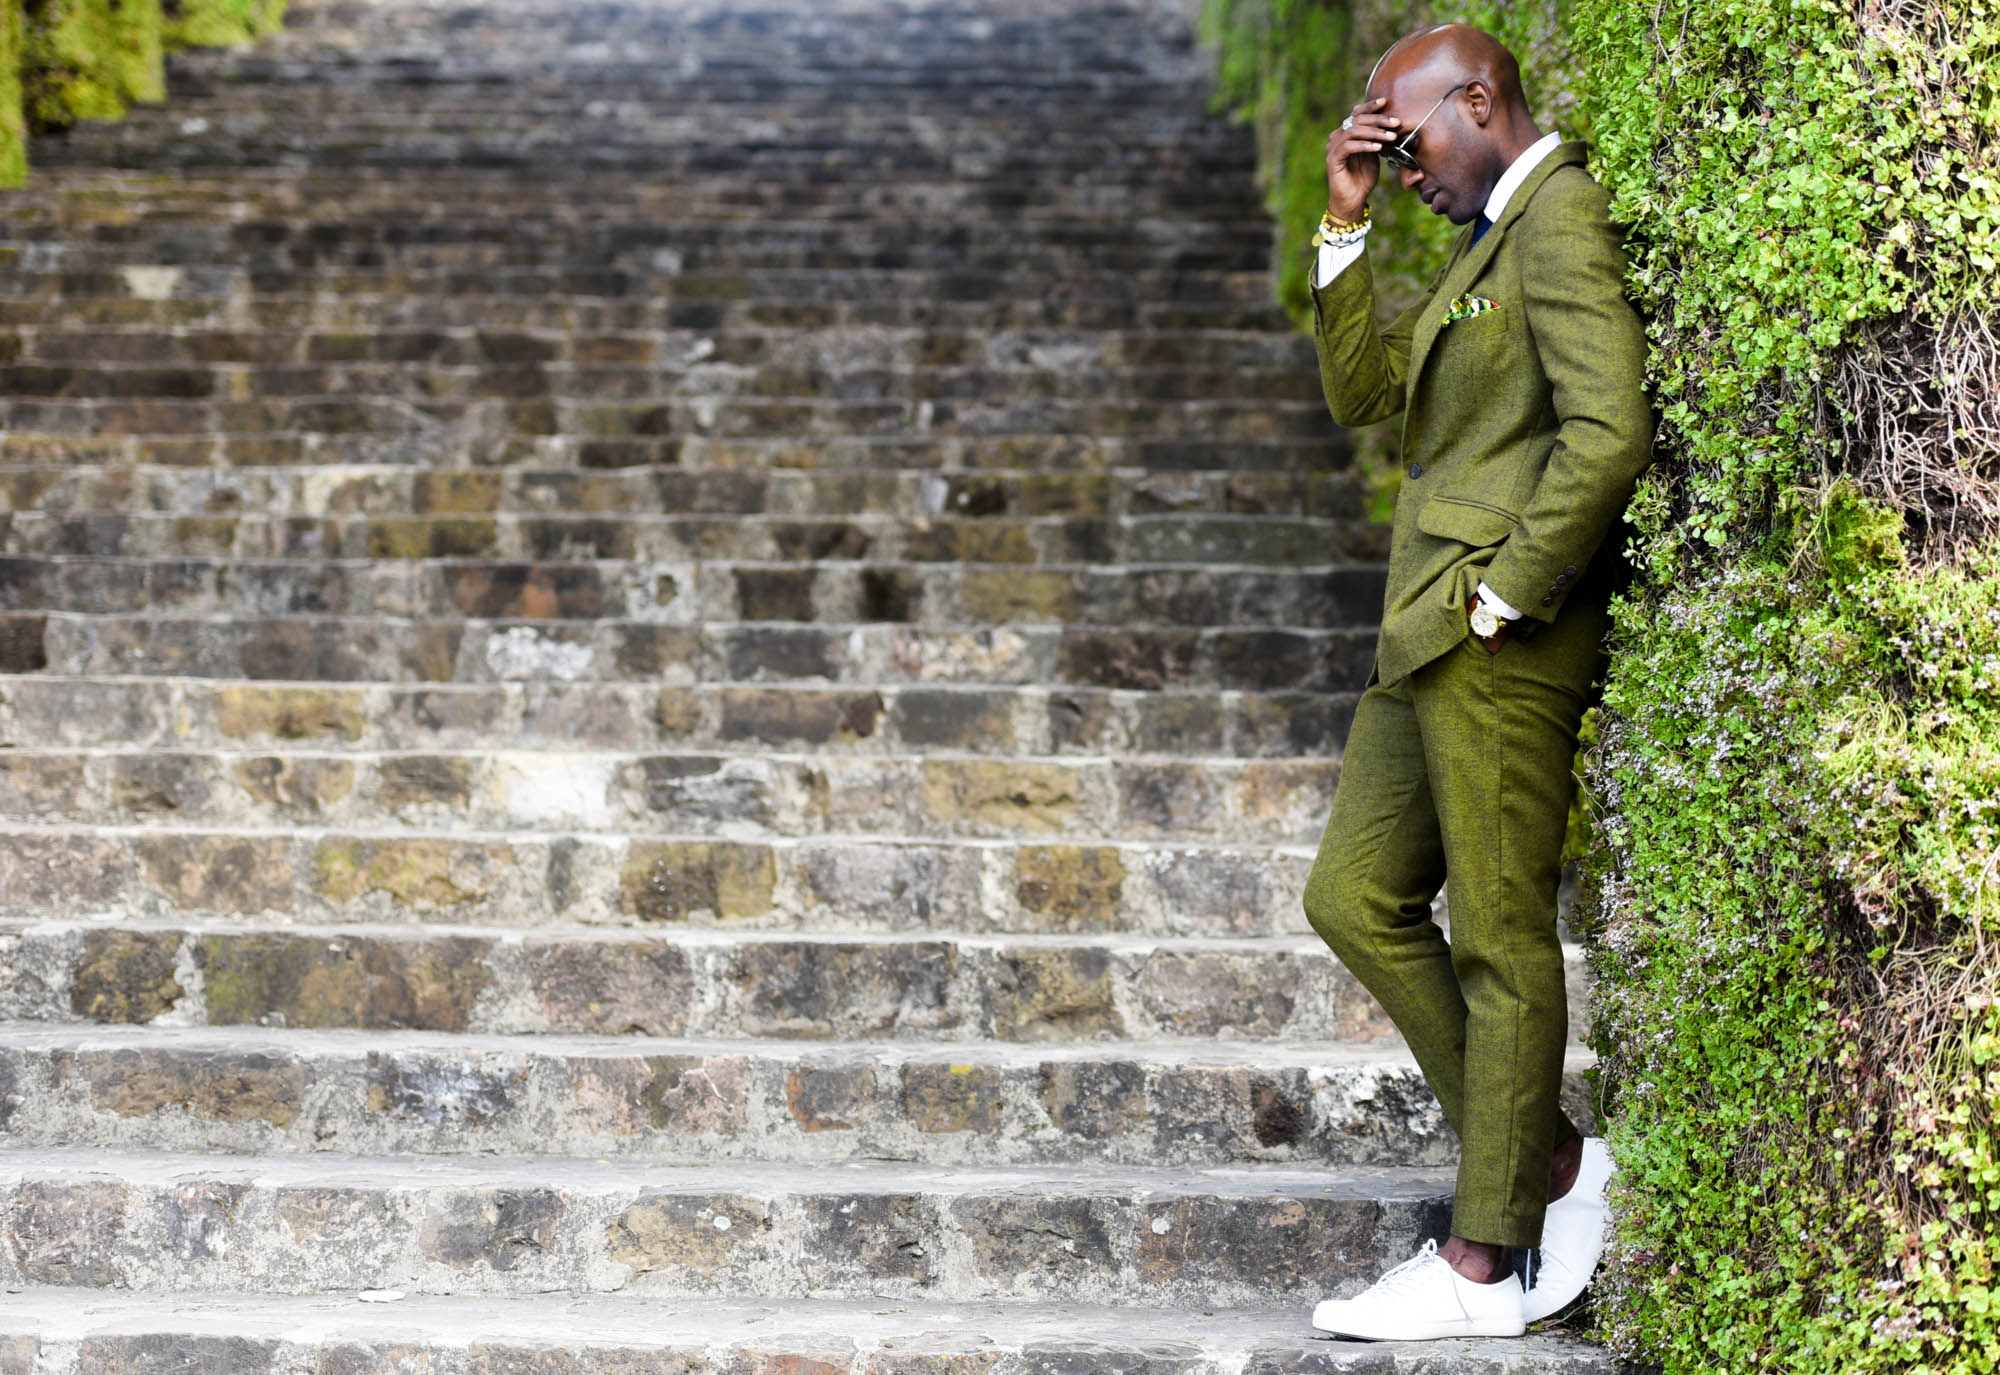 Geoff K. Cooper photographed by Adrian Richards at Pitti Uomo (in Firenze, Florence)